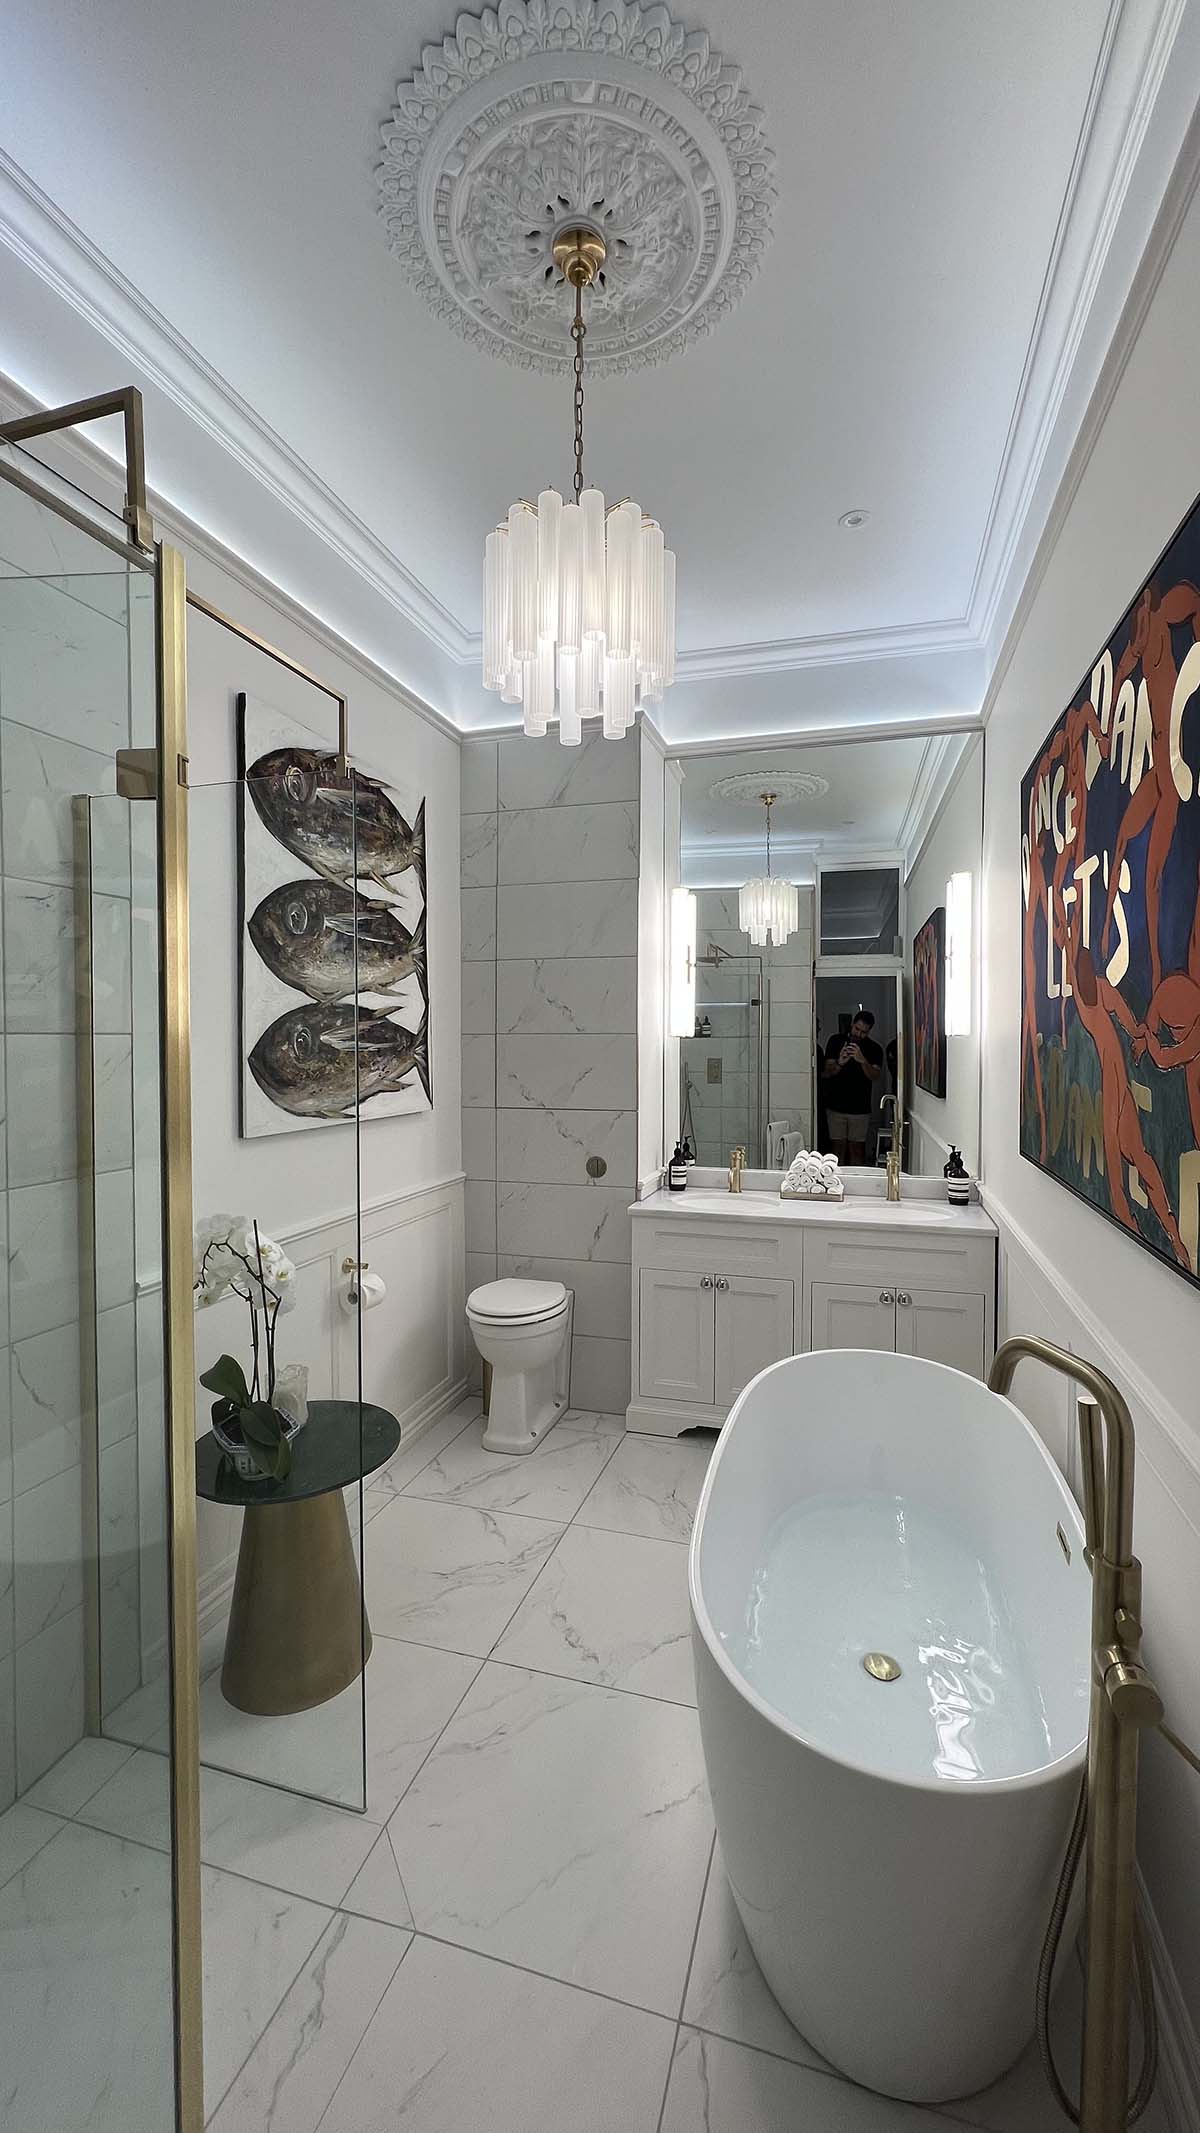 A bathroom with standalone bath, double sinks, chandelier and white marble countertop